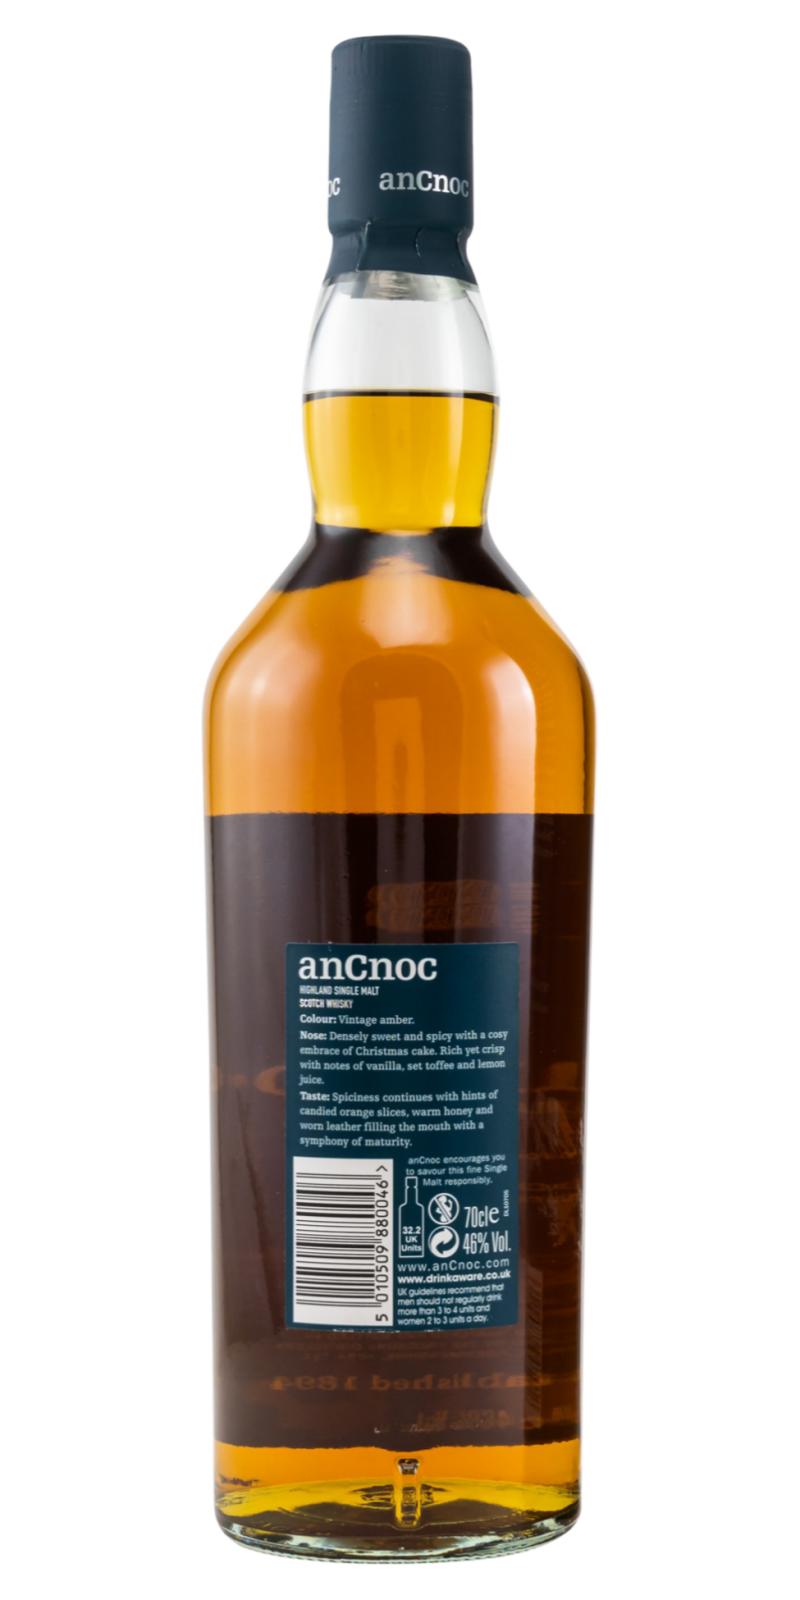 anCnoc 24-year-old